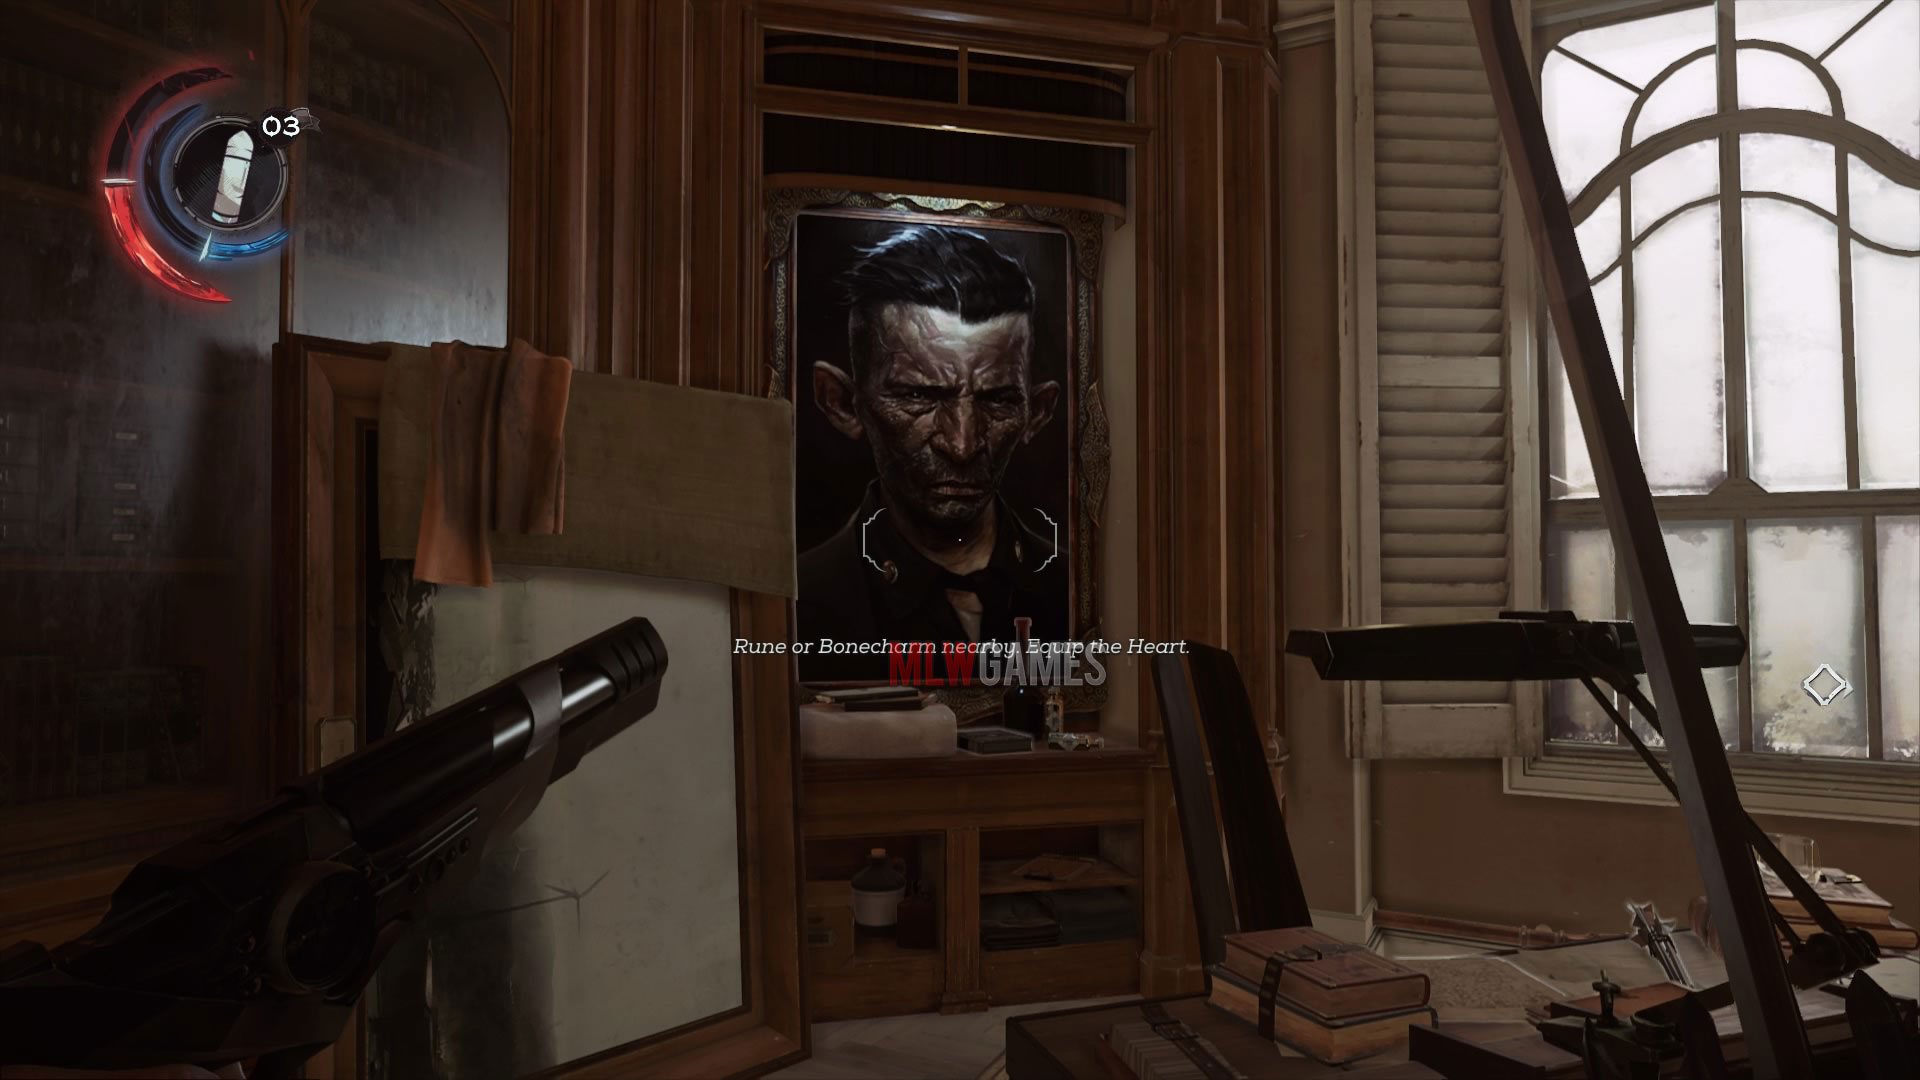 Art Collector trophy in Dishonored 2